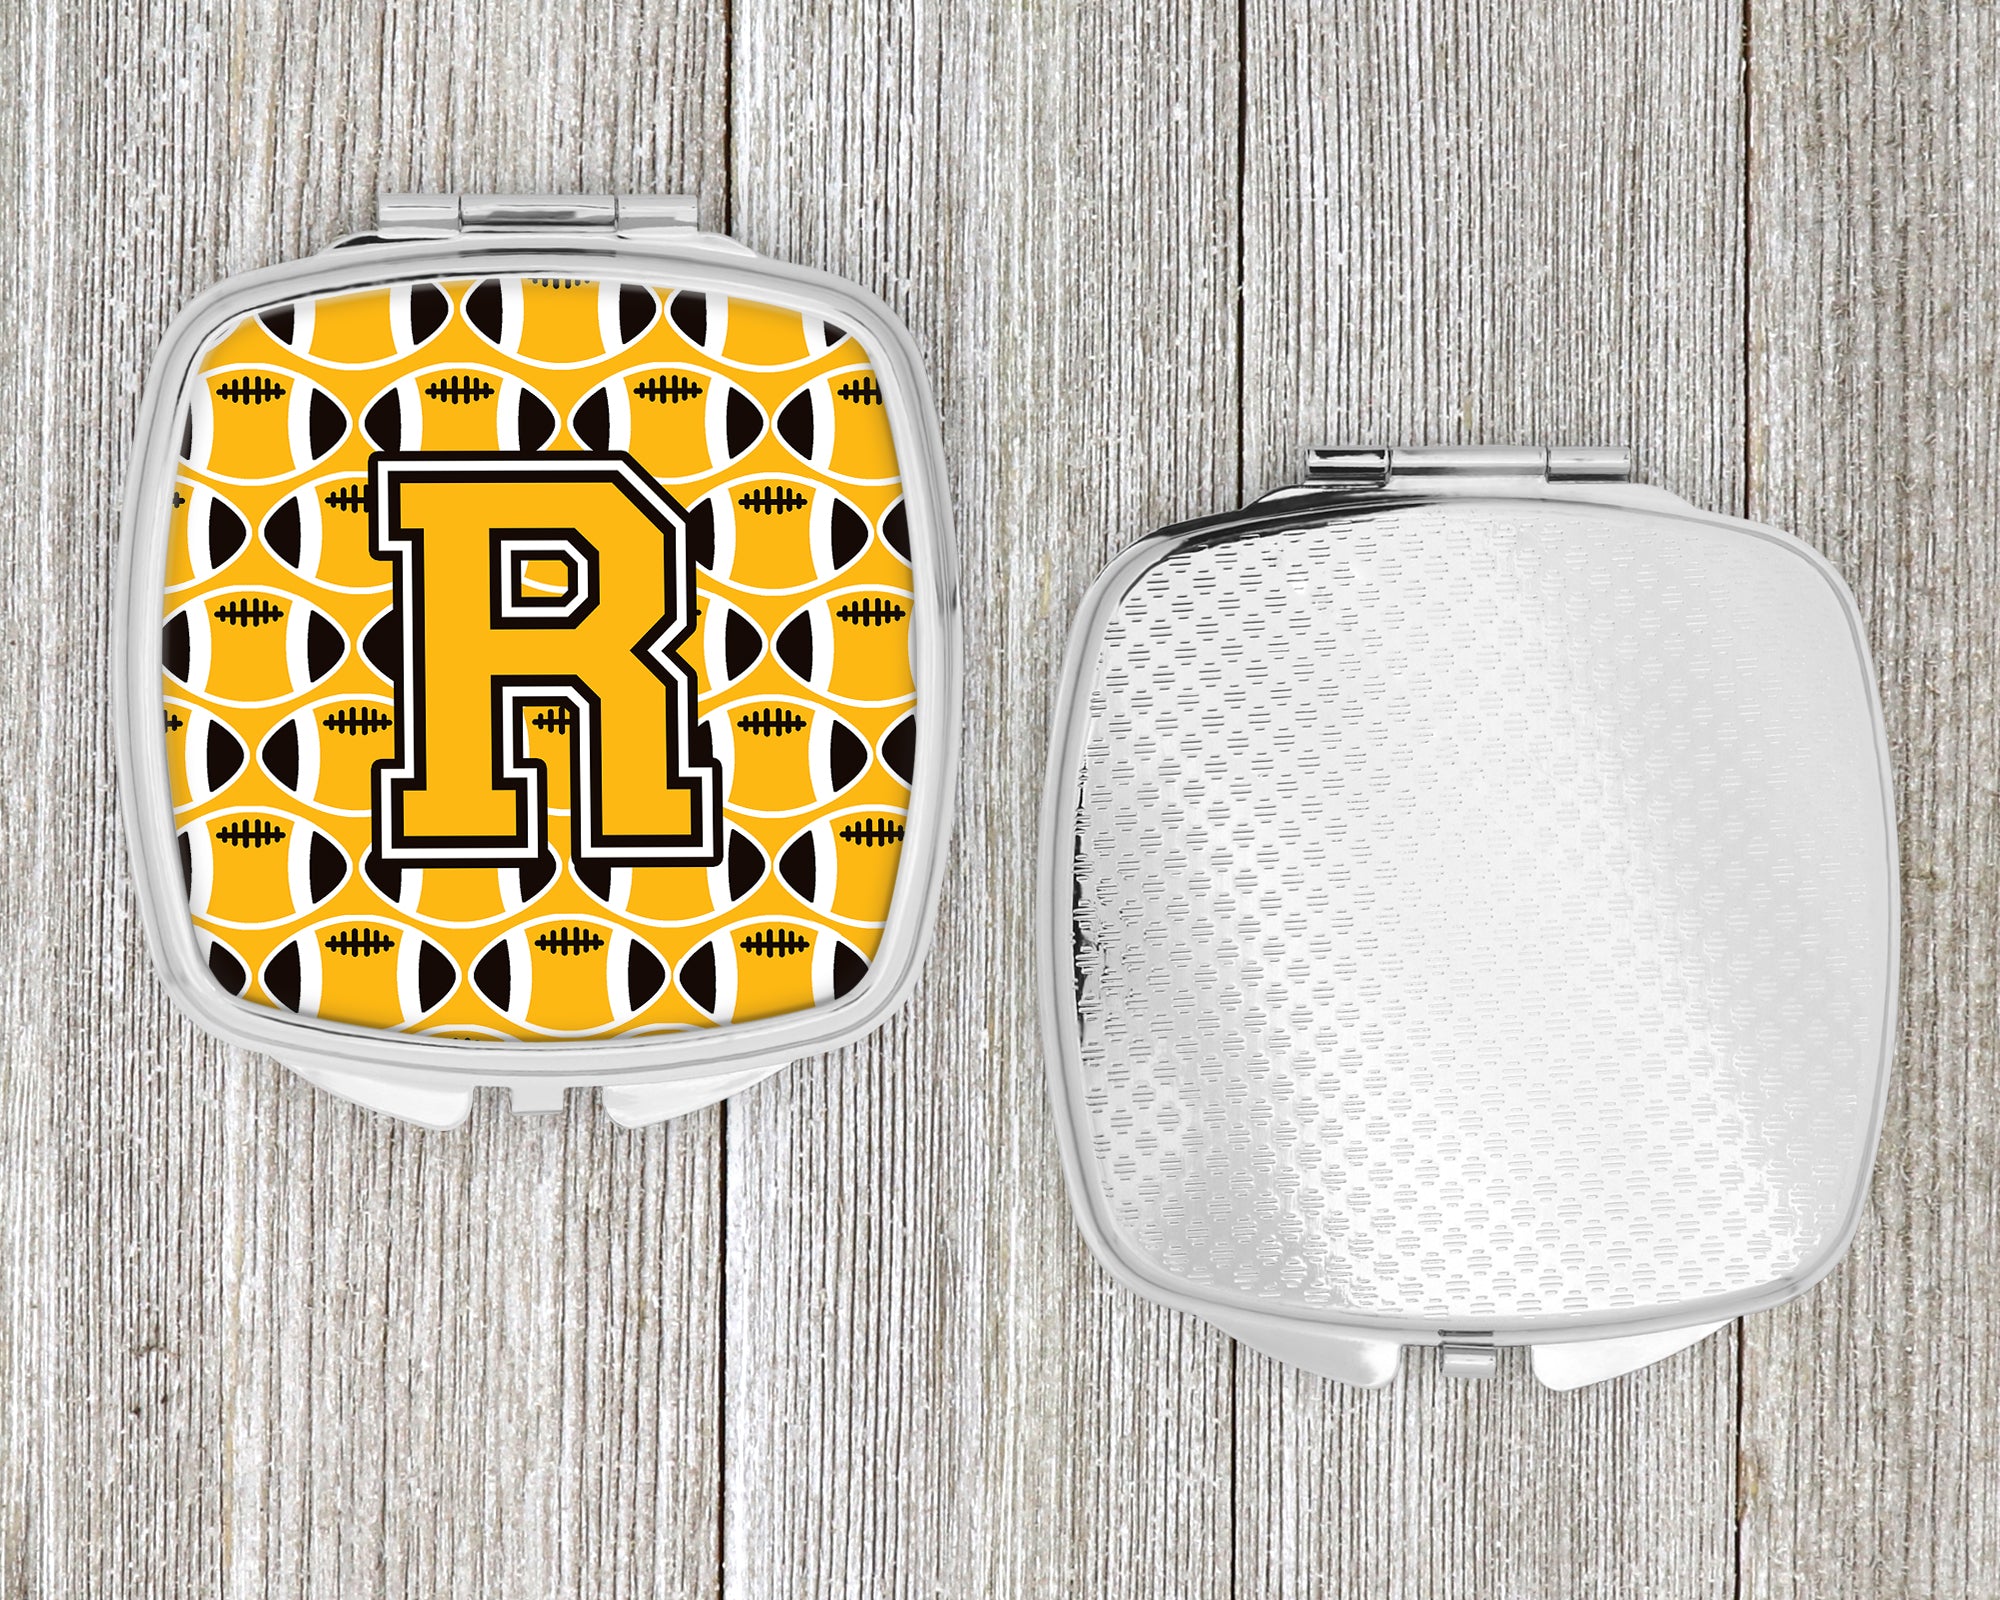 Letter R Football Black, Old Gold and White Compact Mirror CJ1080-RSCM  the-store.com.